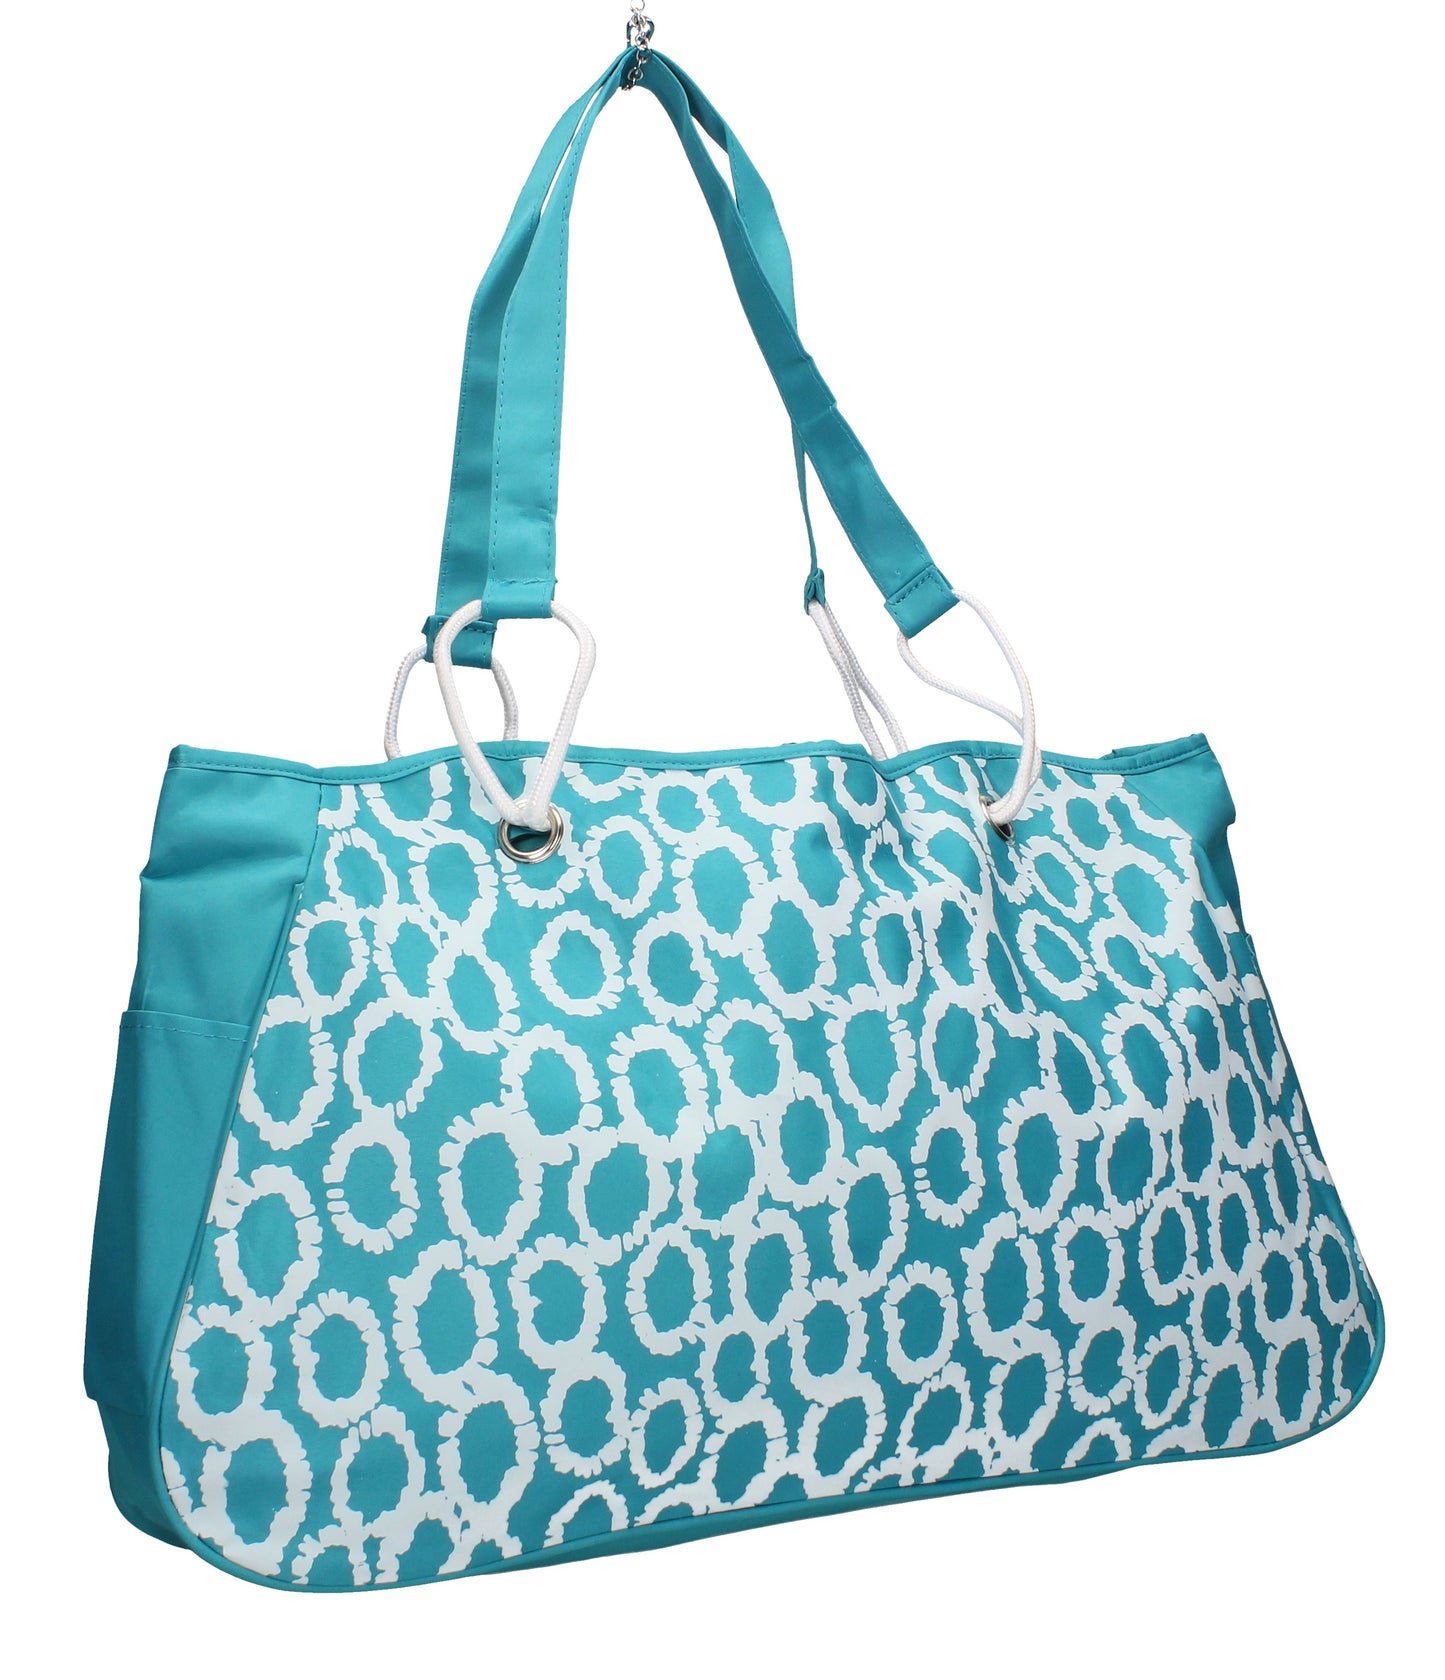 Swanky Swans Ring Print Beach Tote Bag Summer Handbag Light BluePerfect for School, Weddings, Day out!